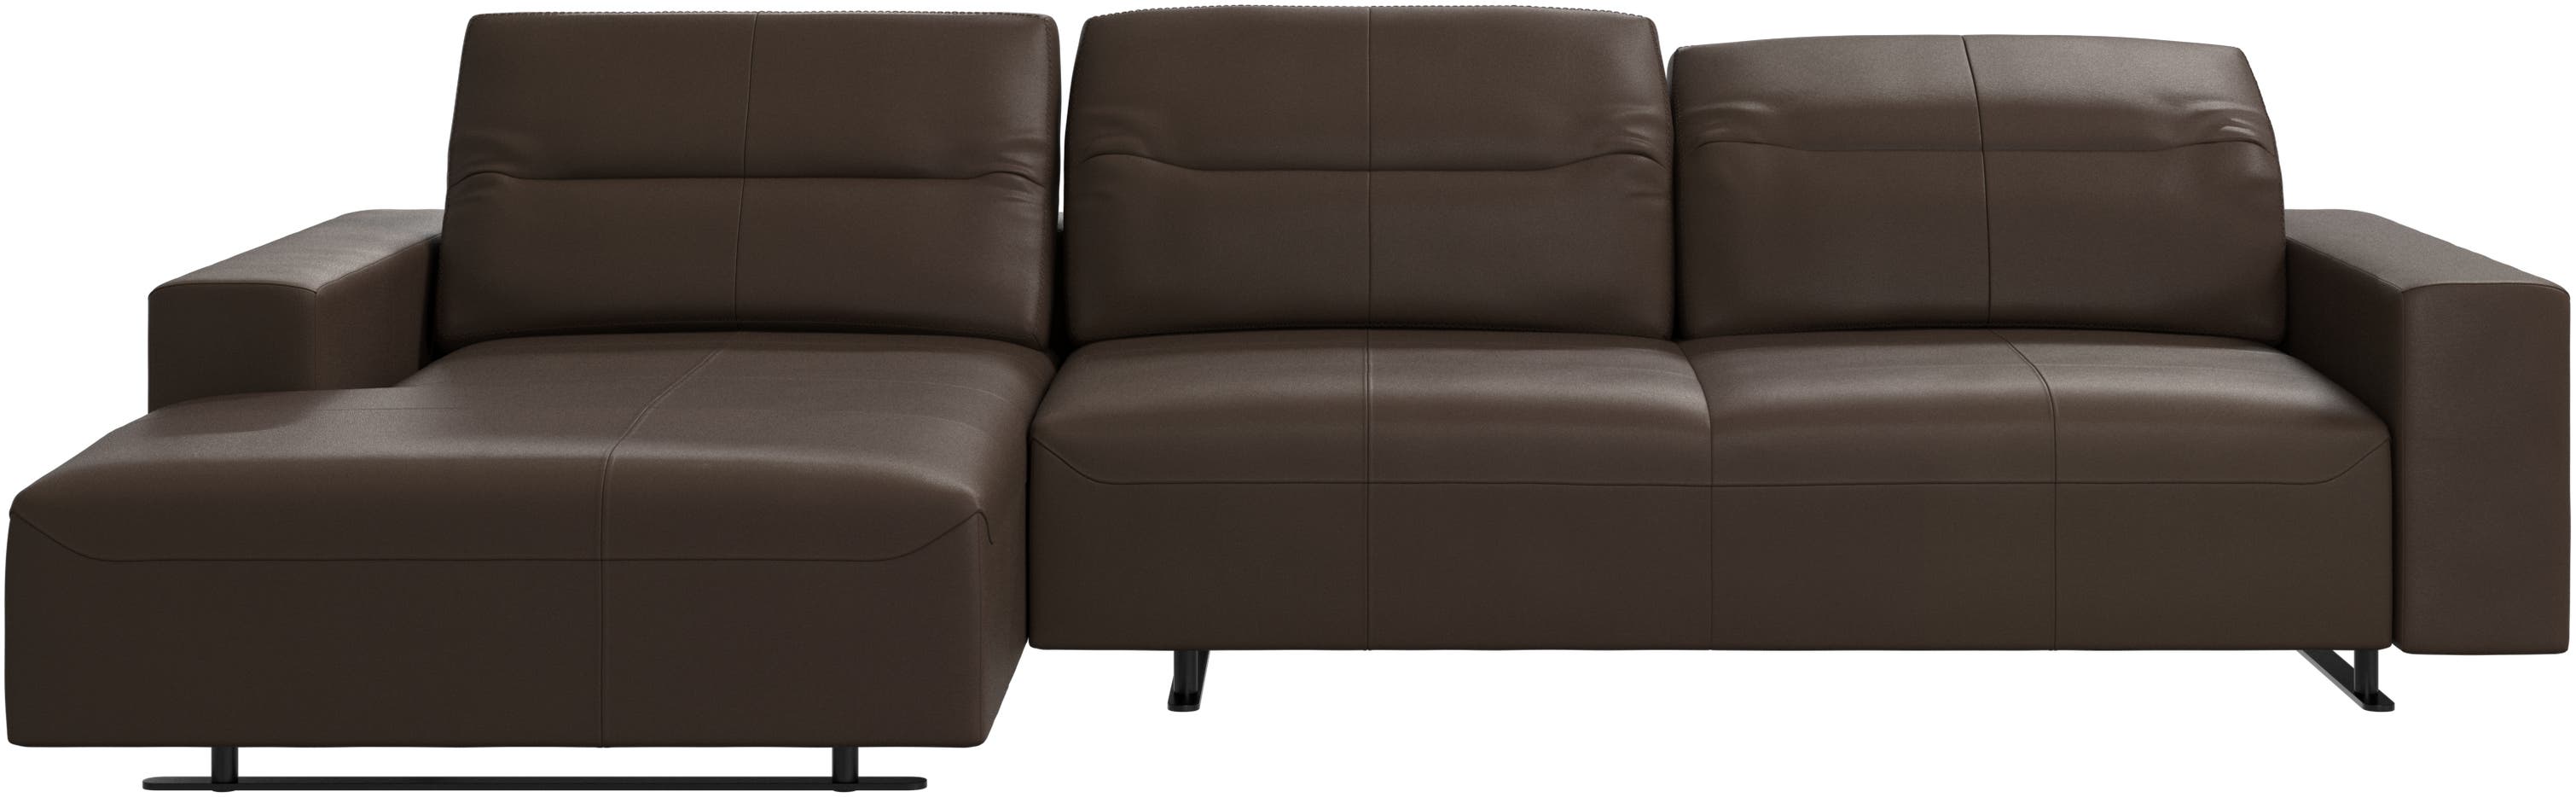 Hampton sofa with adjustable back and resting unit left side, storage right side